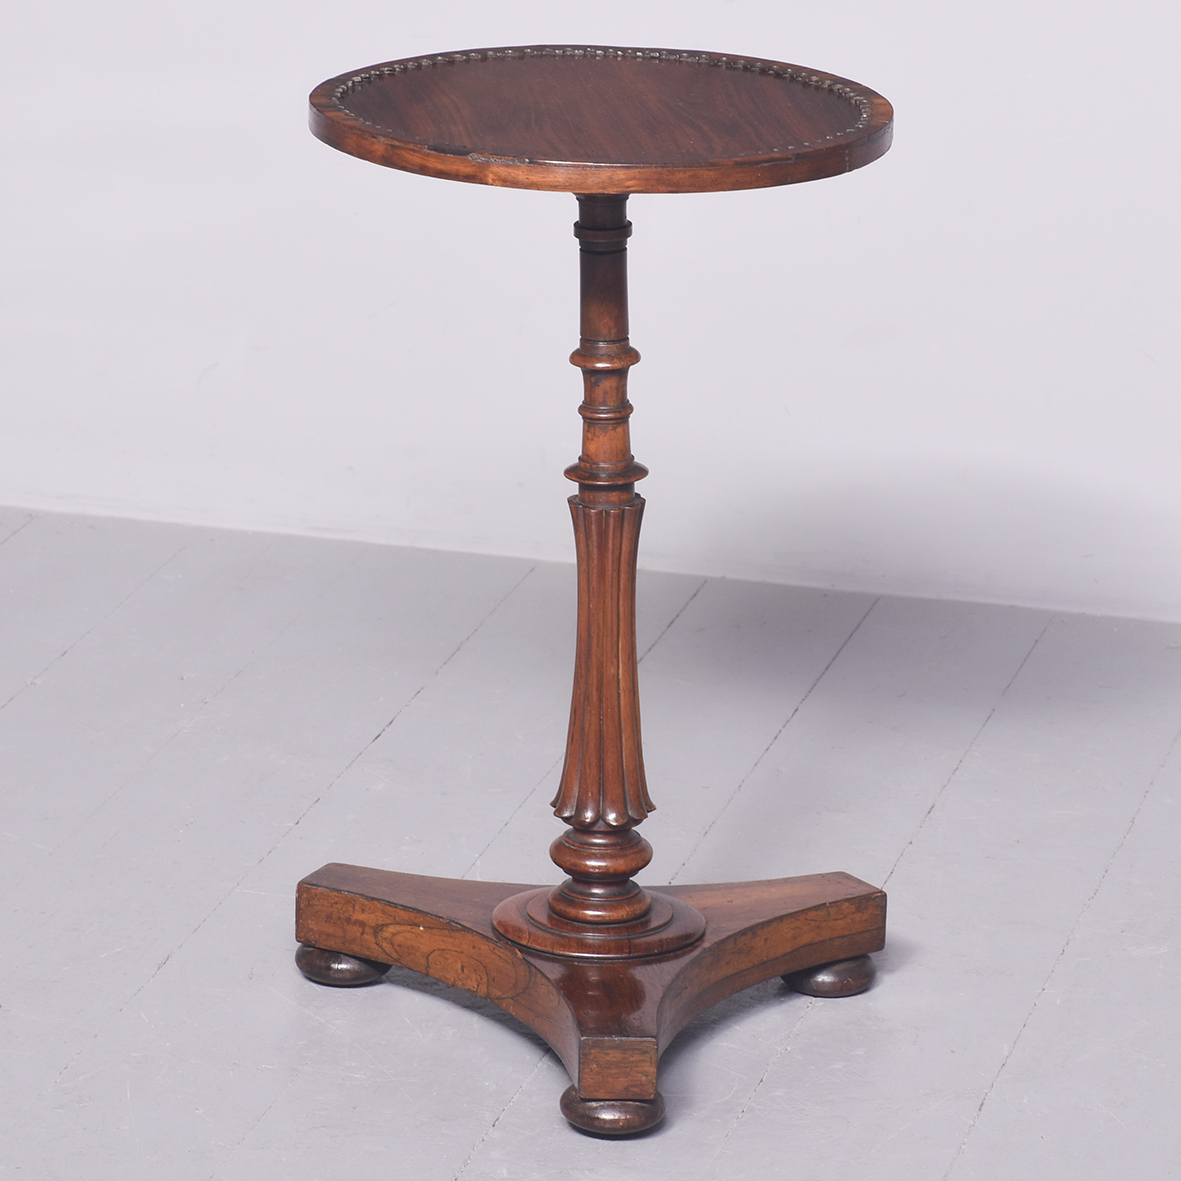 Attractive William IV Rosewood Wine or Occasional Circular Top Table Antique Furniture